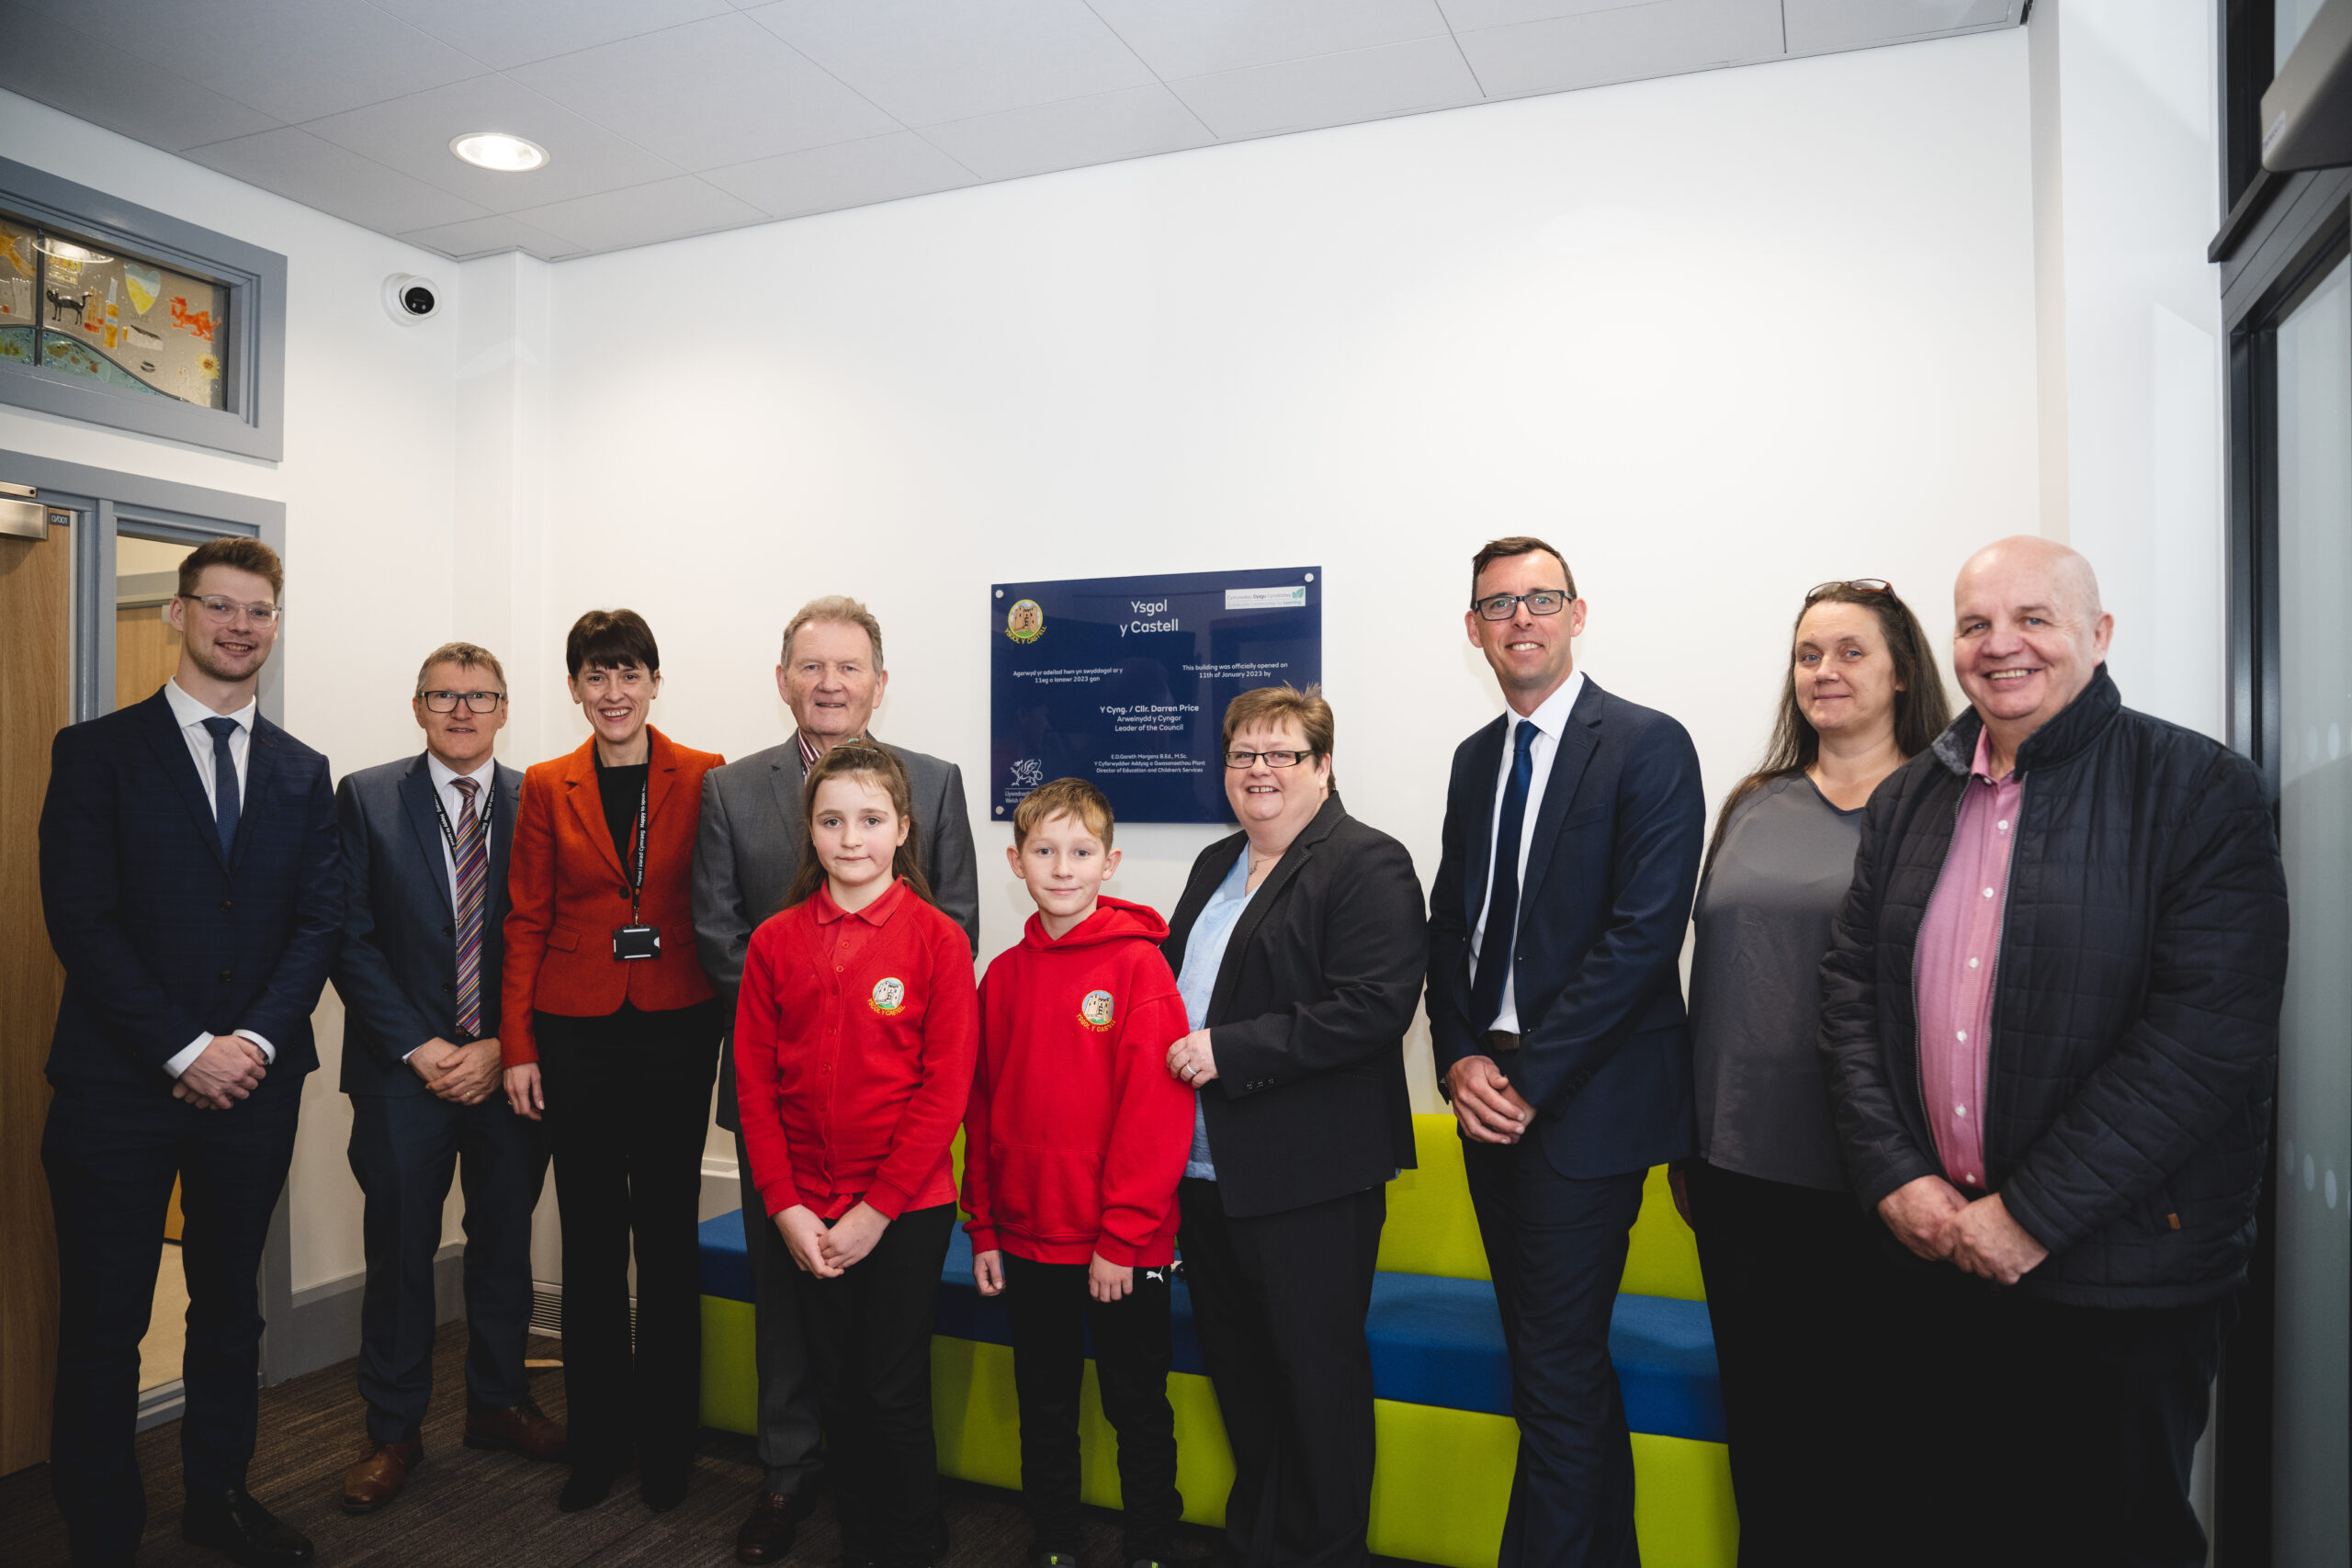 Ysgol Y Castell’s new building officially opened